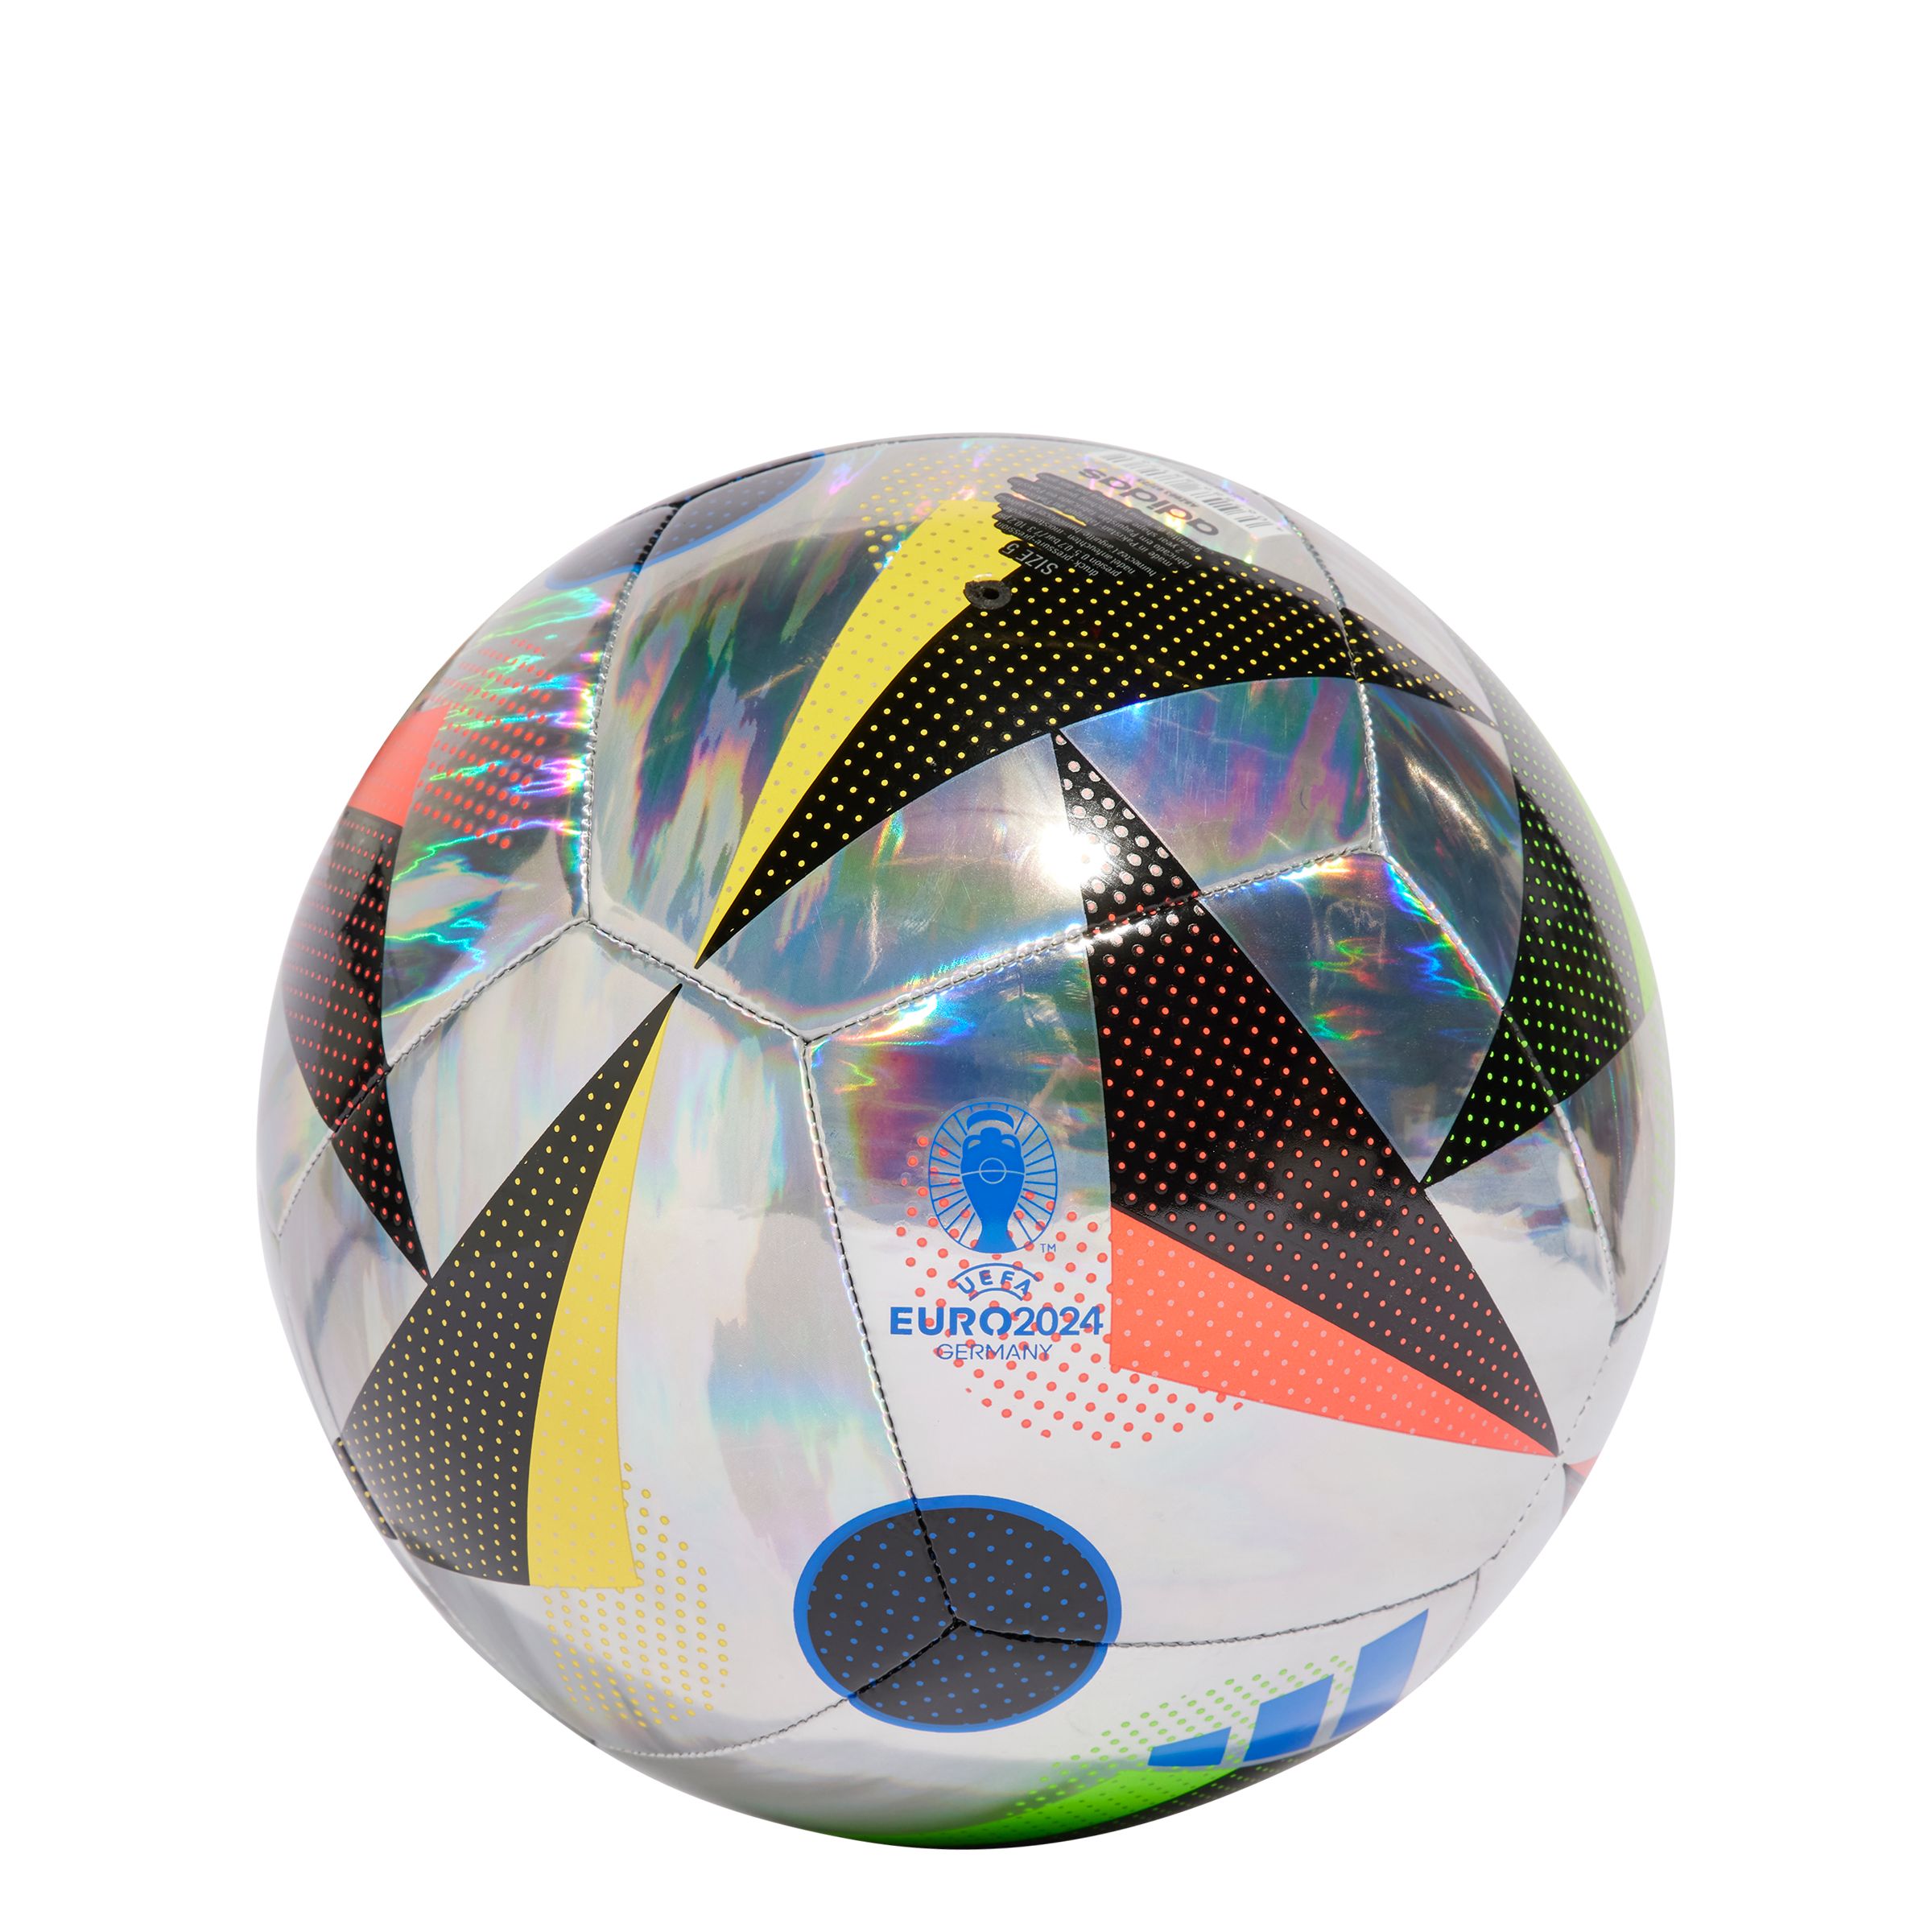 Image of adidas Euro24 Training Foil Soccer Ball - Size 5